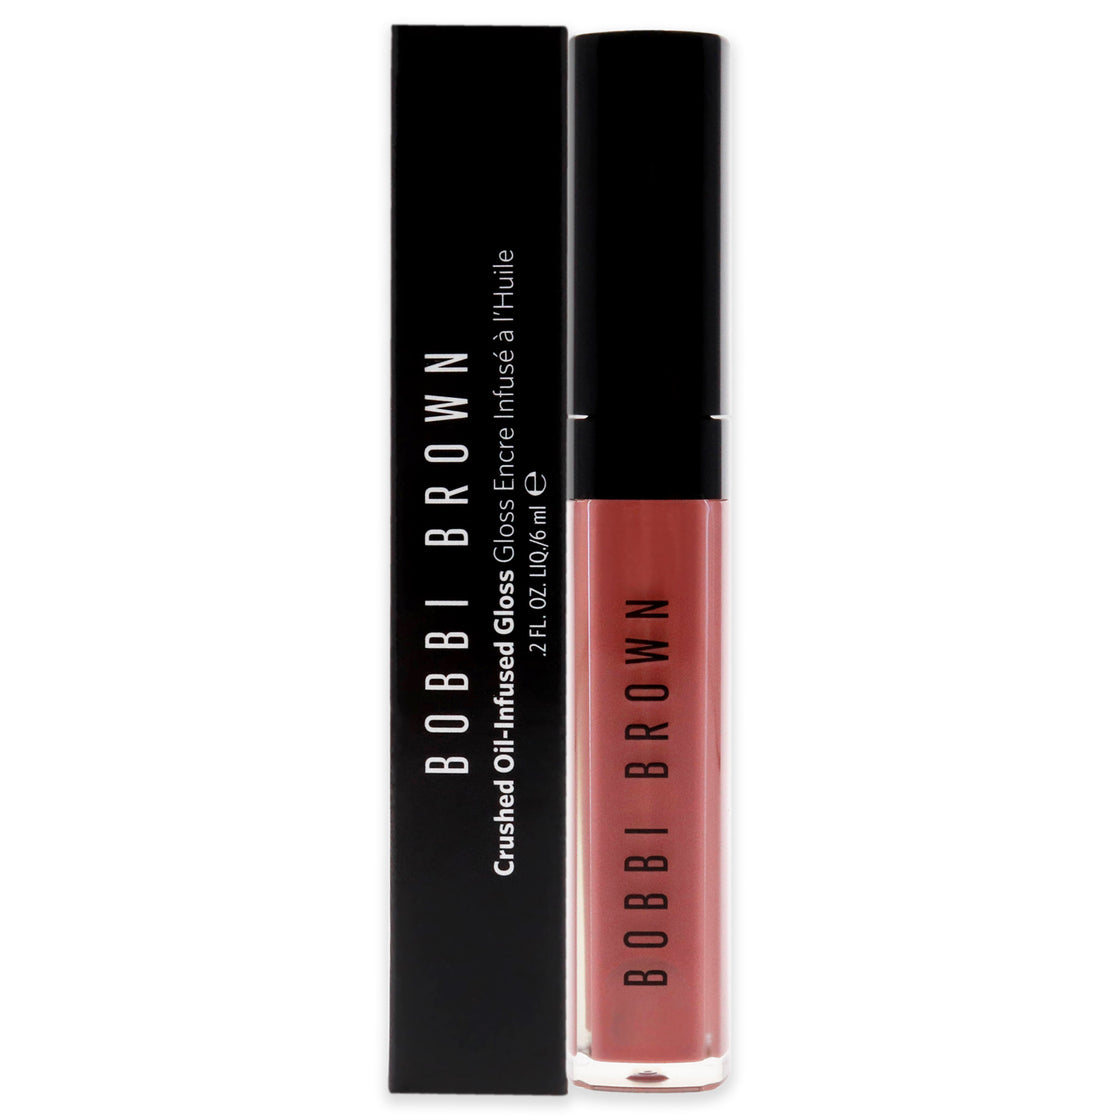 Crushed Oil-Infused Gloss - New Romantic by Bobbi Brown for Women - 0.2 oz Lip Gloss